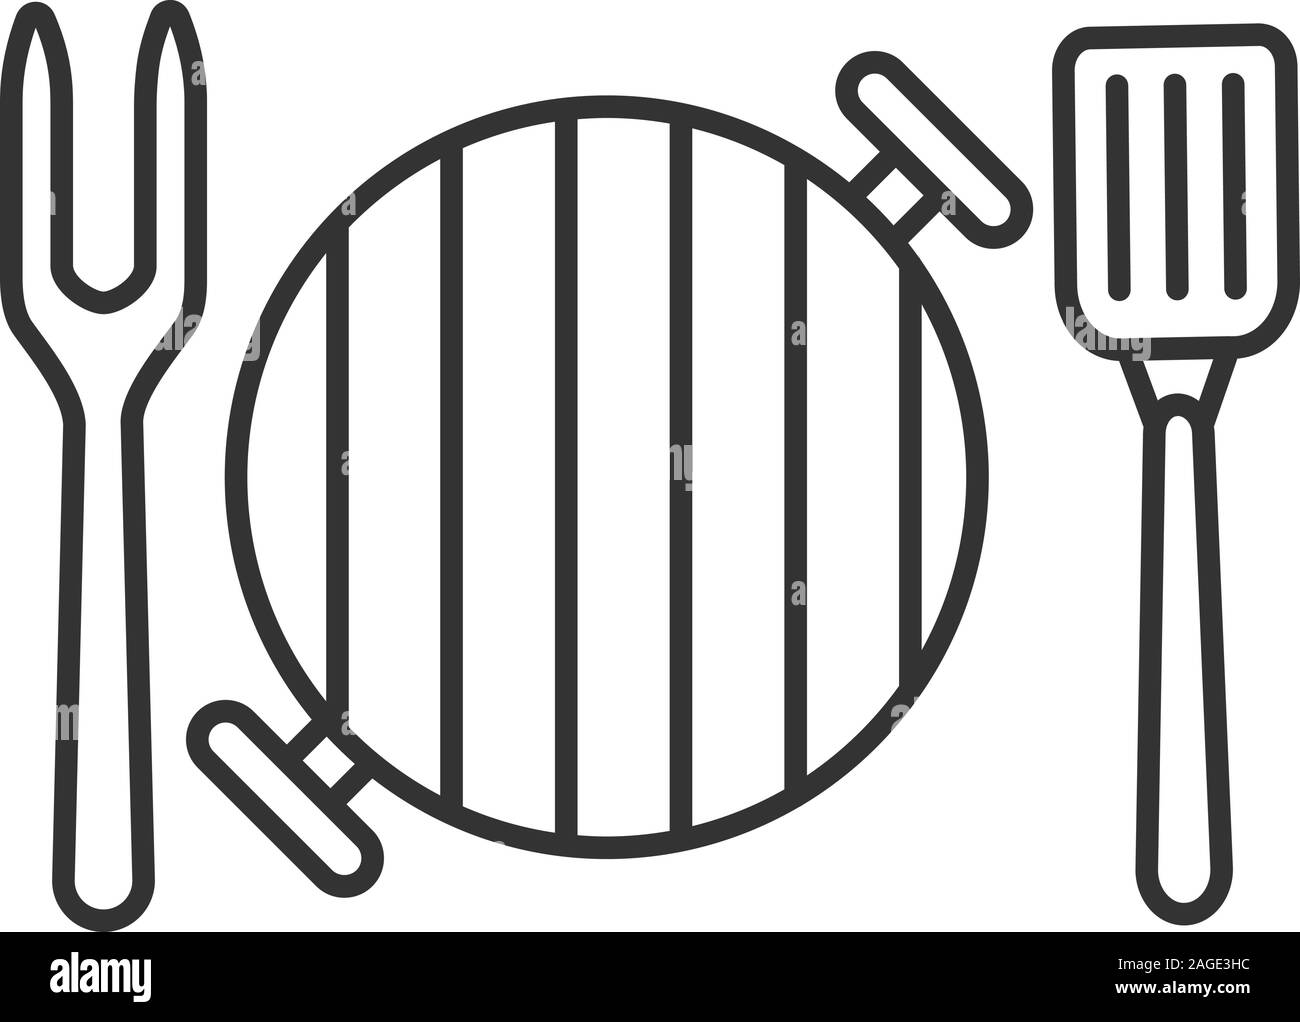 https://c8.alamy.com/comp/2AGE3HC/barbecue-grill-with-fork-and-spatula-linear-icon-thin-line-illustration-contour-symbol-vector-isolated-drawing-2AGE3HC.jpg